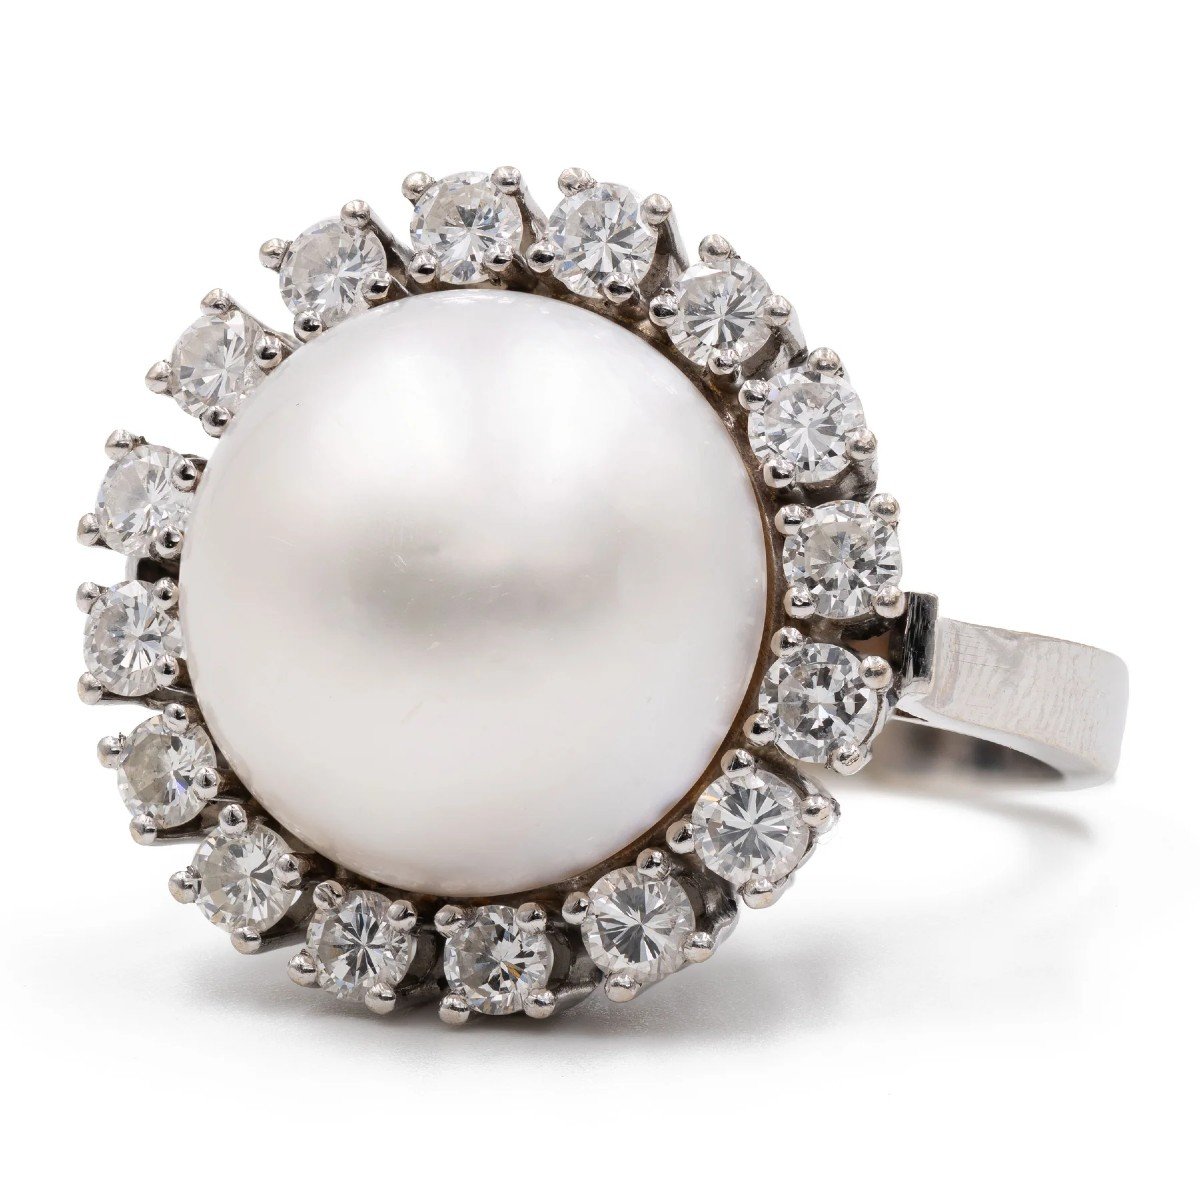 Vintage 14k White Gold Ring With Mabè Pearl And Diamonds (1ctw)